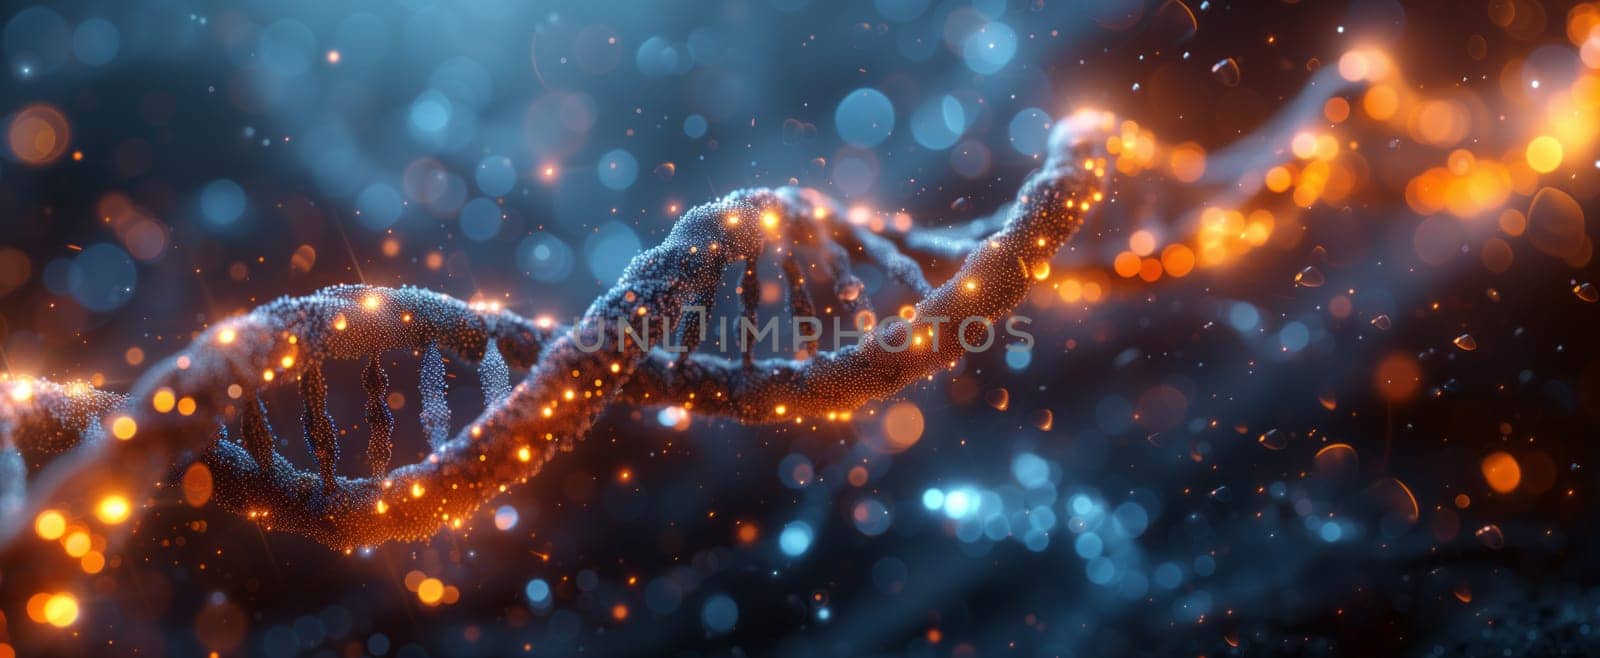 a computer generated image of a dna strand with lights coming out of it by richwolf